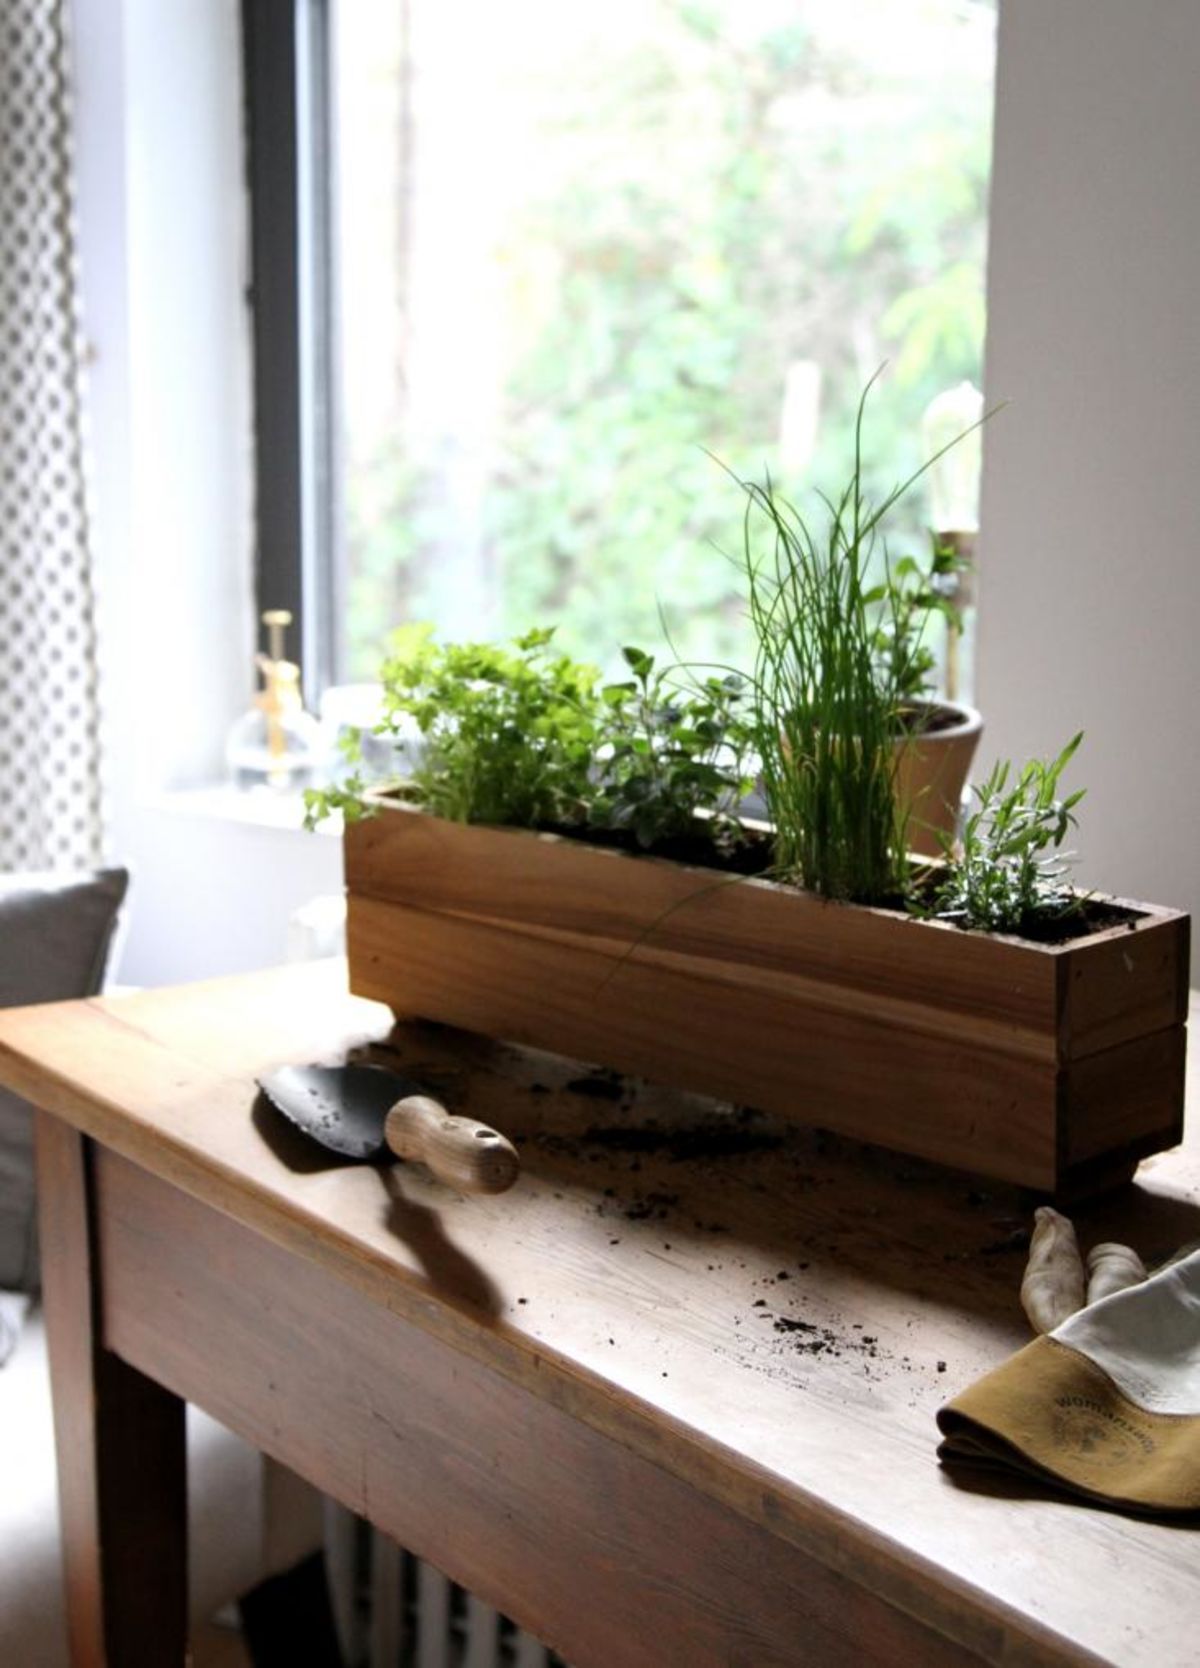 How to make wooden planters